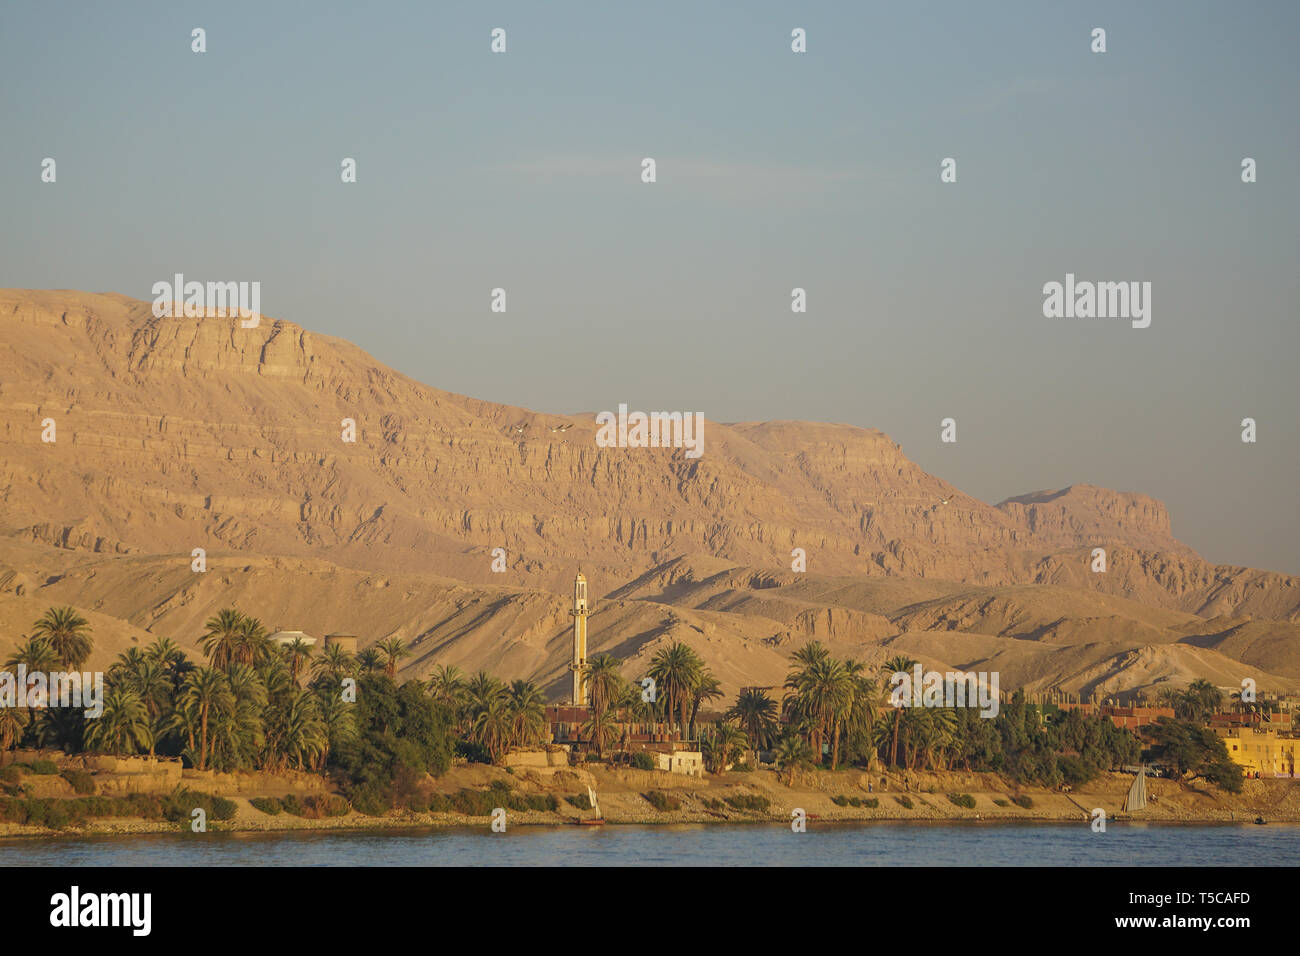 Nile River, Egypt: Minaret, houses, date palm trees, feluccas (sailboats), and large sand dunes at sunset along the west bank of the Nile River. Stock Photo